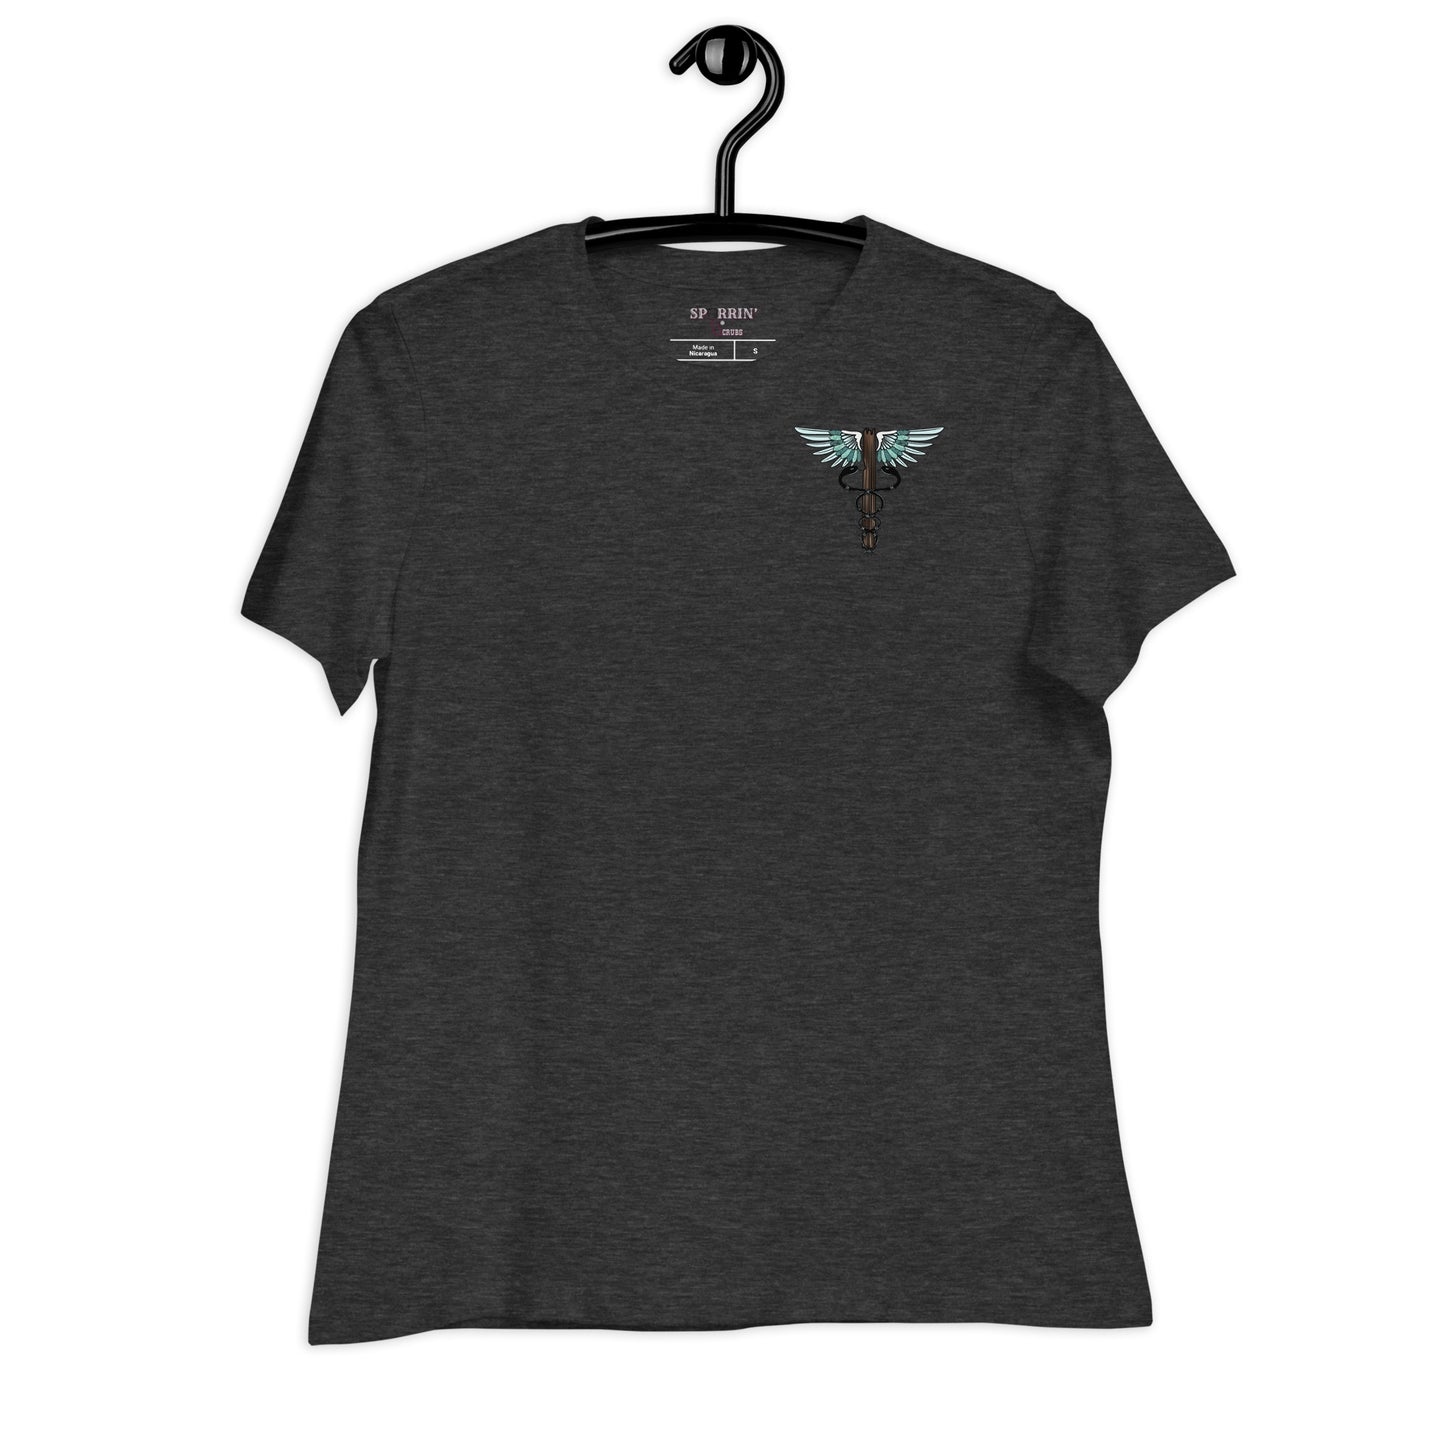 Support Your Local- Dark Colors Women's Relaxed T-Shirt